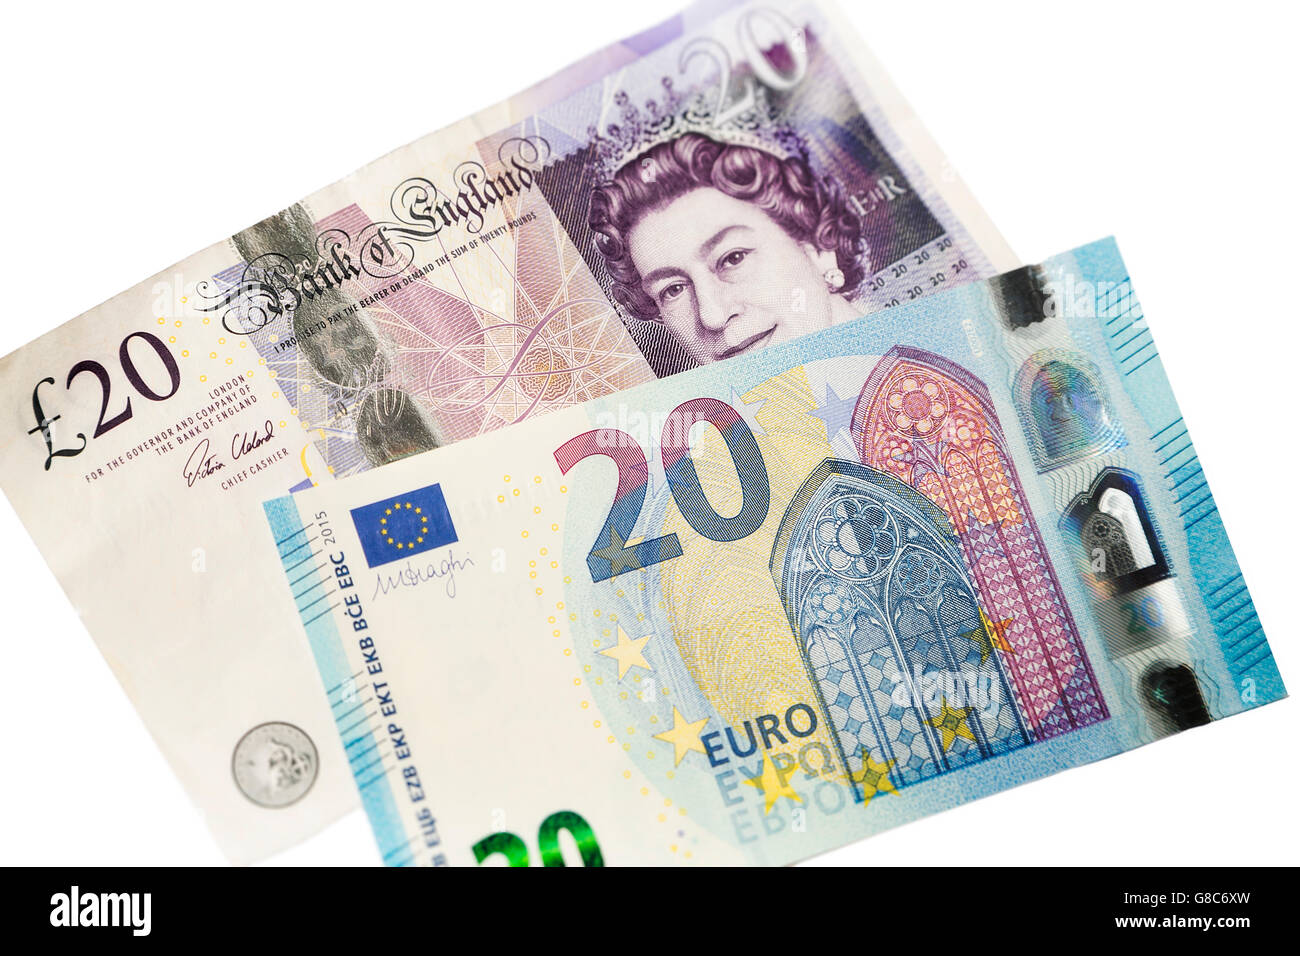 British European exit (Brexit) concept of twenty Euro and Pound note isolated on a white background Stock Photo